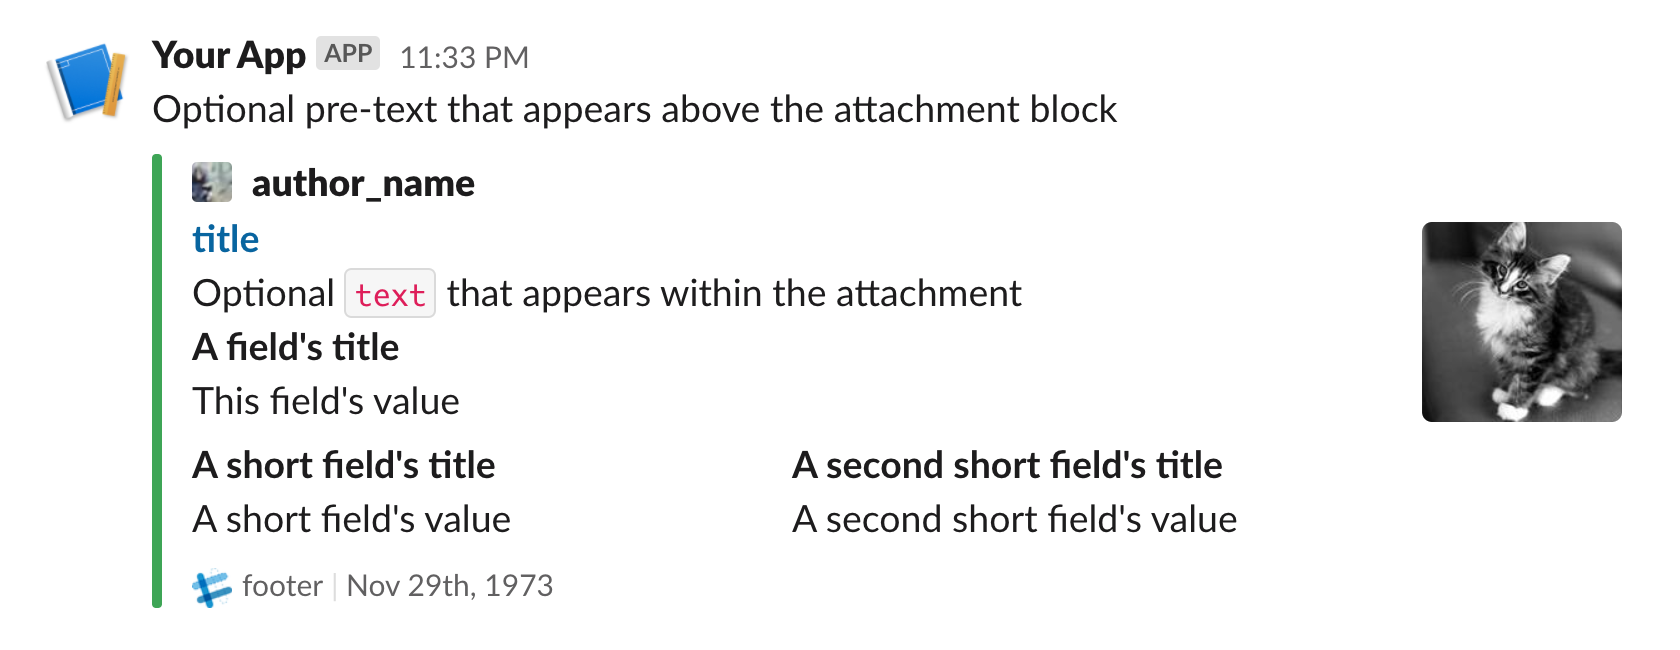 Example message with attachment showing full range of fields